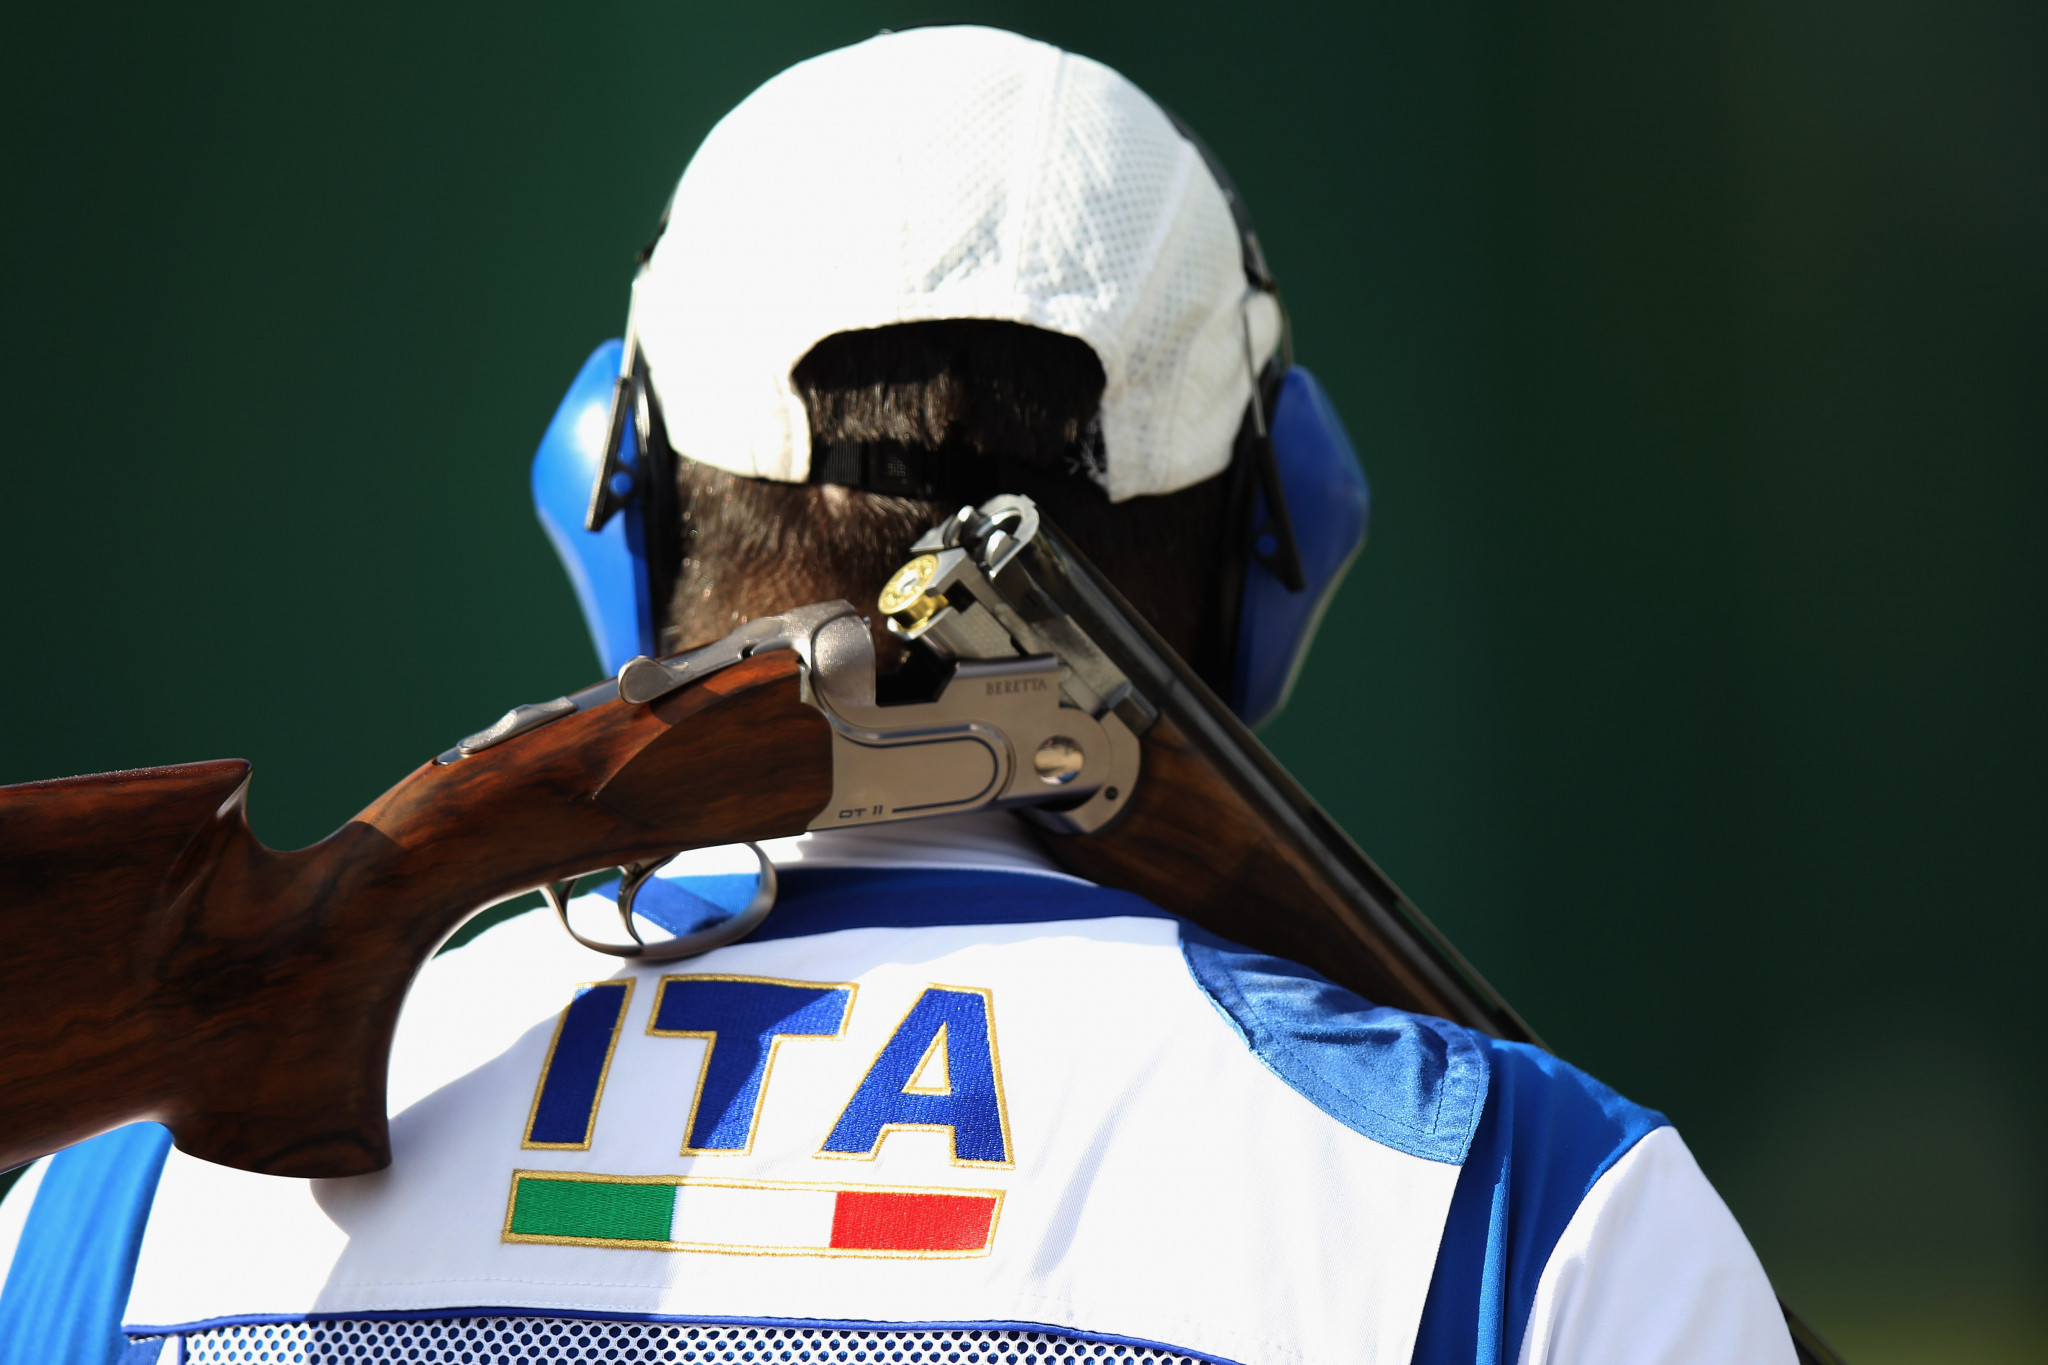 Italian duo Domenico Simeone and Simona Scocchetti beat Americans in a final shoot-off at the ISSF Shotgun World Cup in Lima ©Getty Images